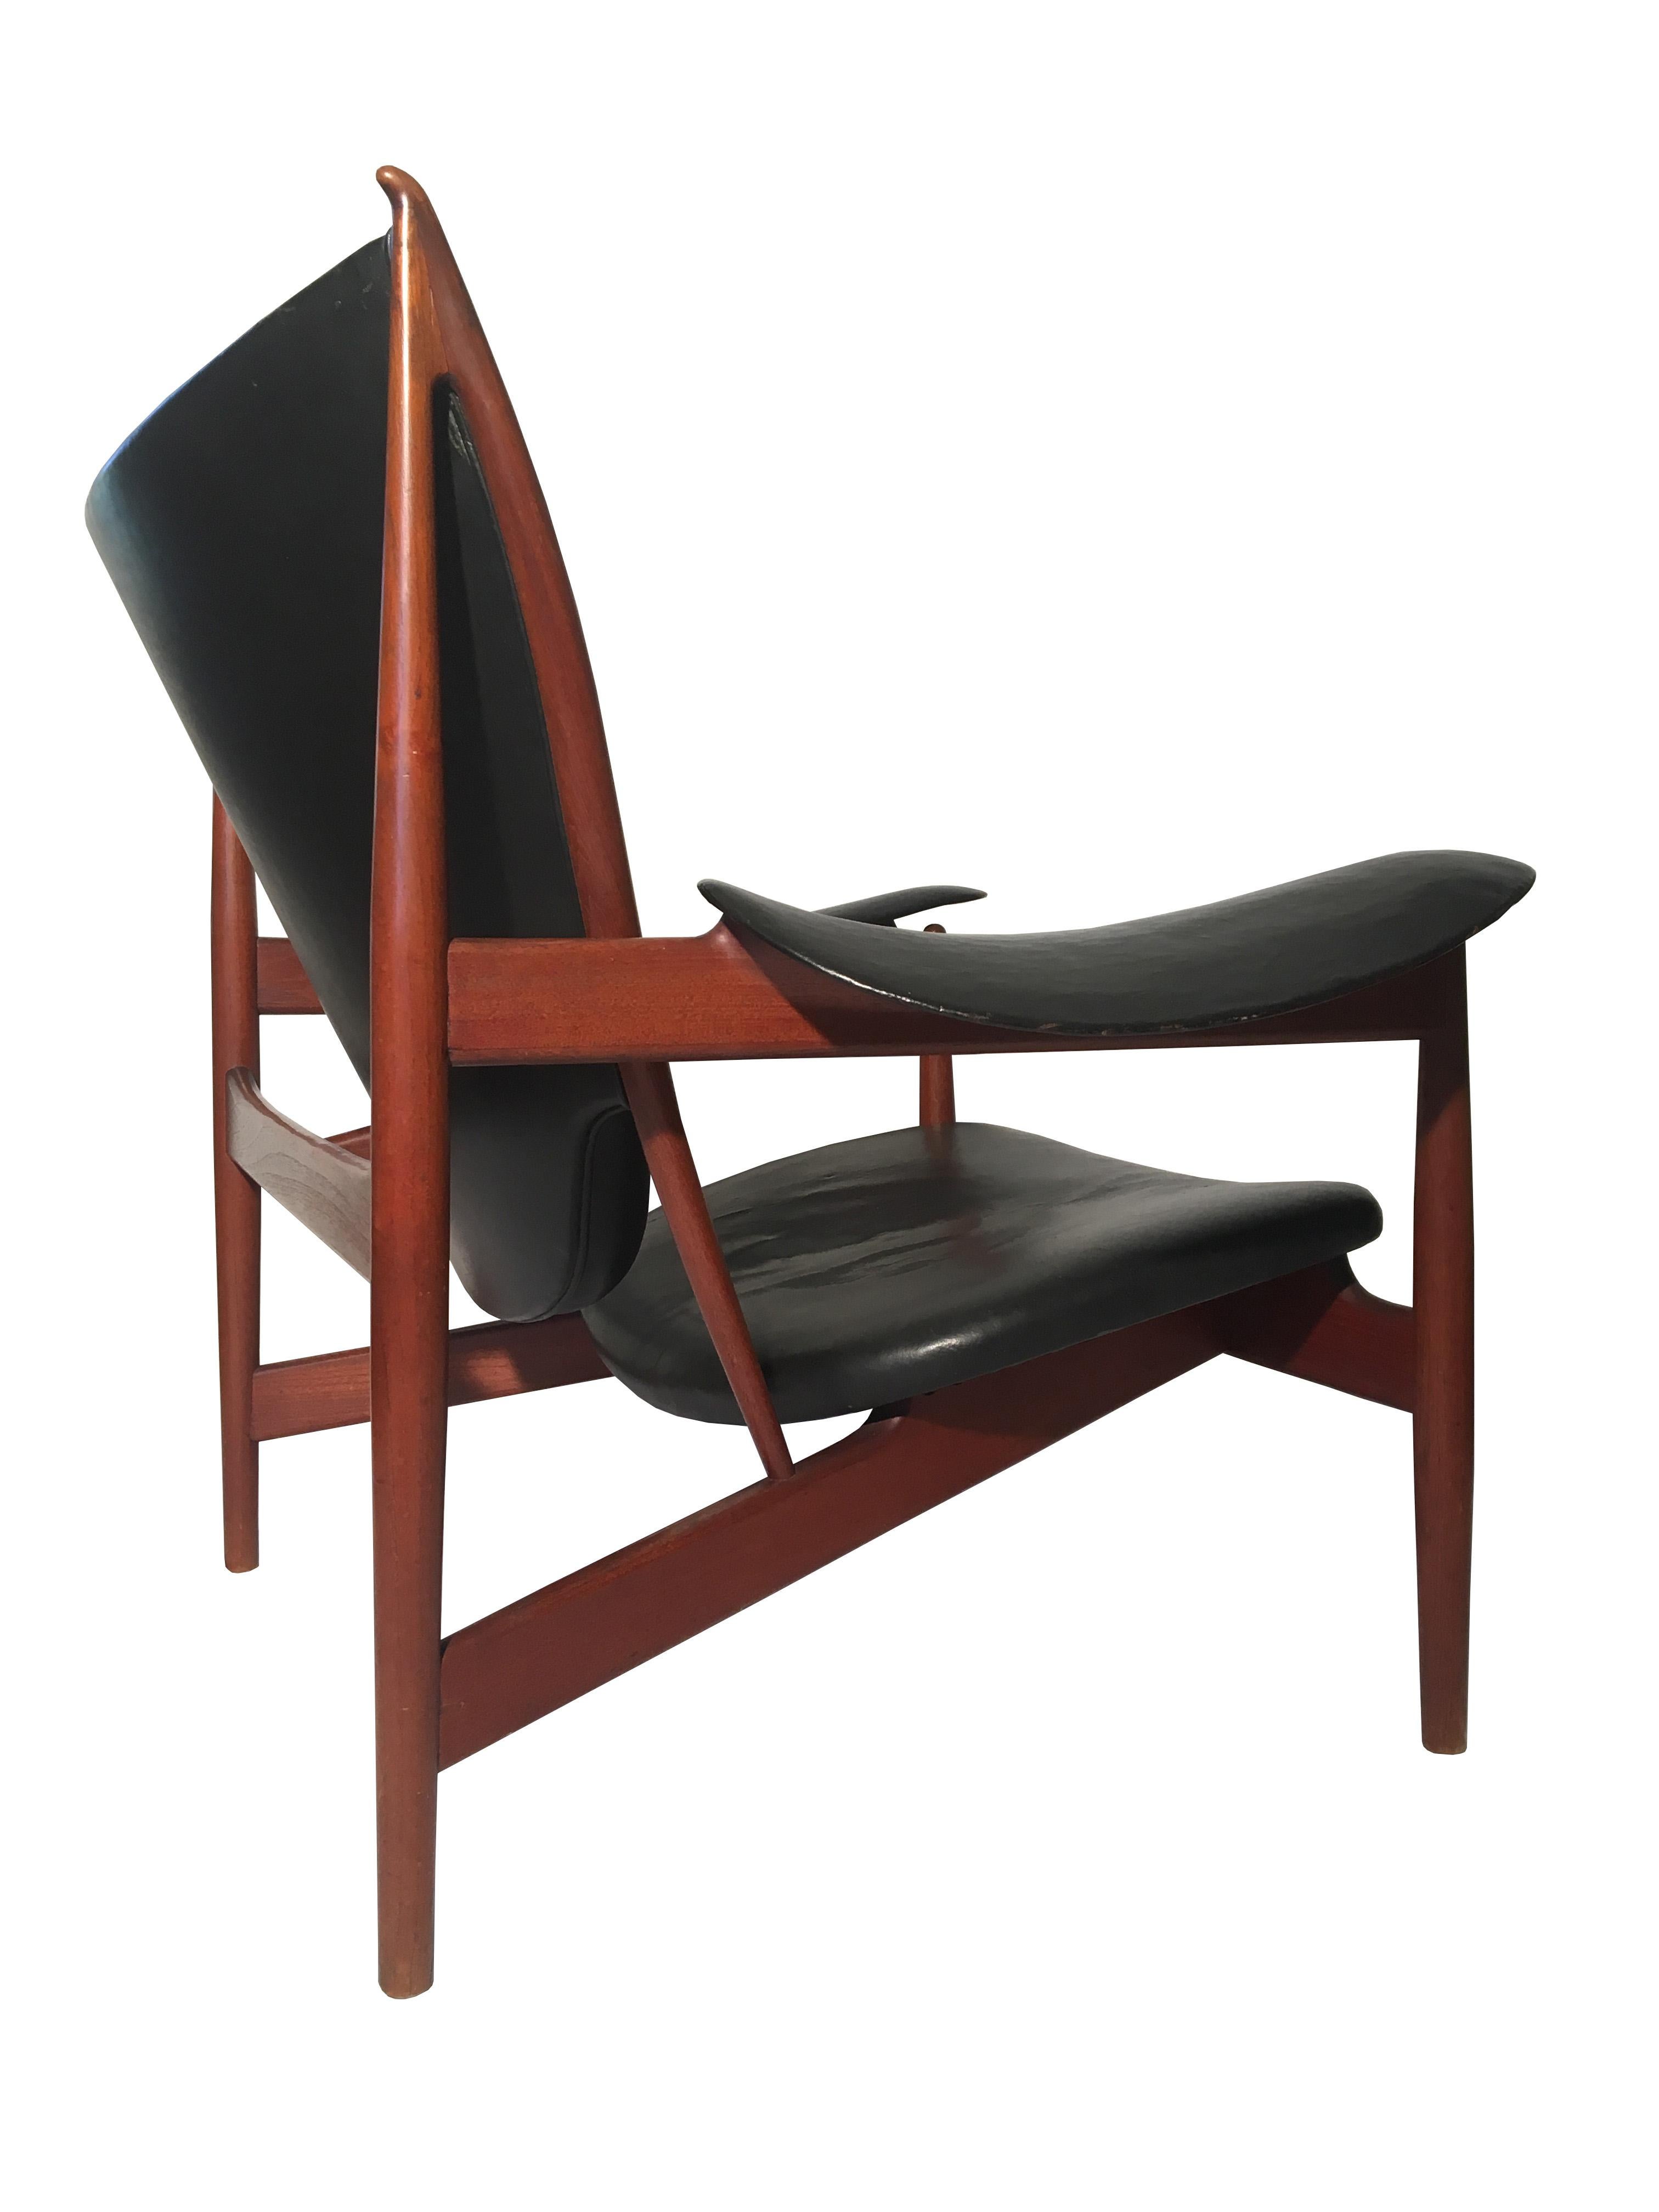 Finn Juhl Chieftain Chair for Niels Vodder in Teak and Black Leather For Sale 6